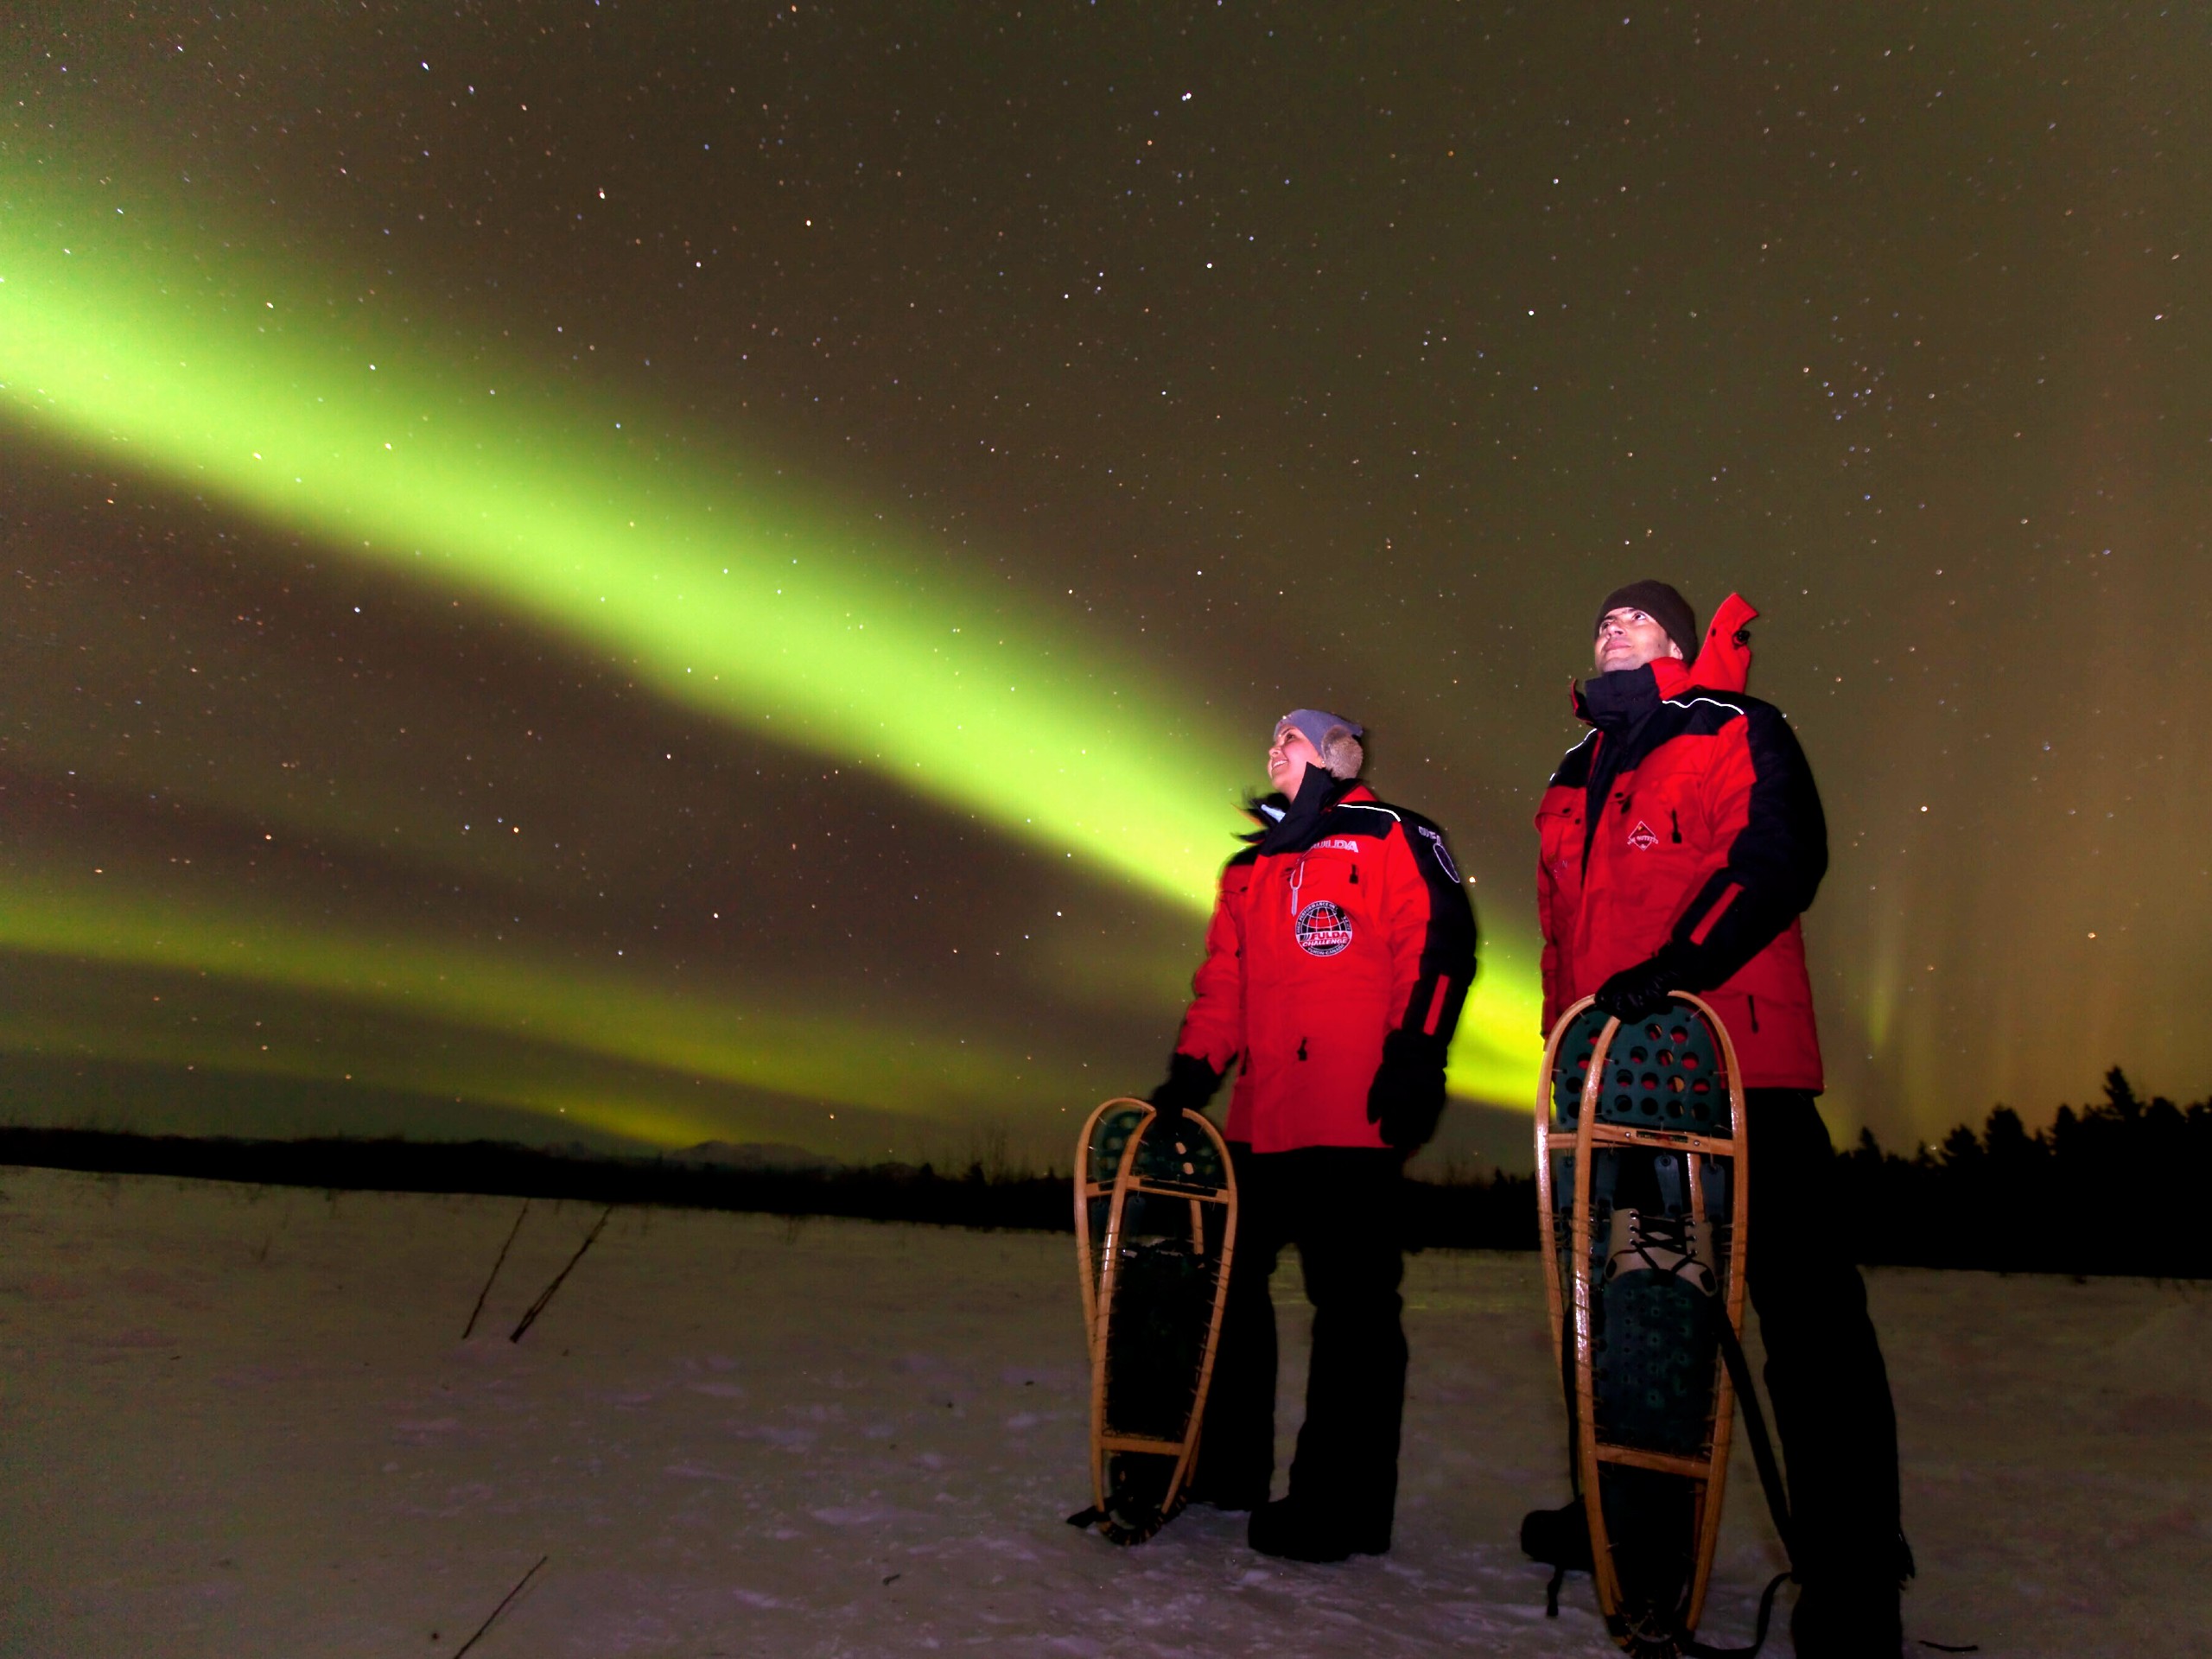 Couple watching the Northern Lights while on a snowshoeing trip